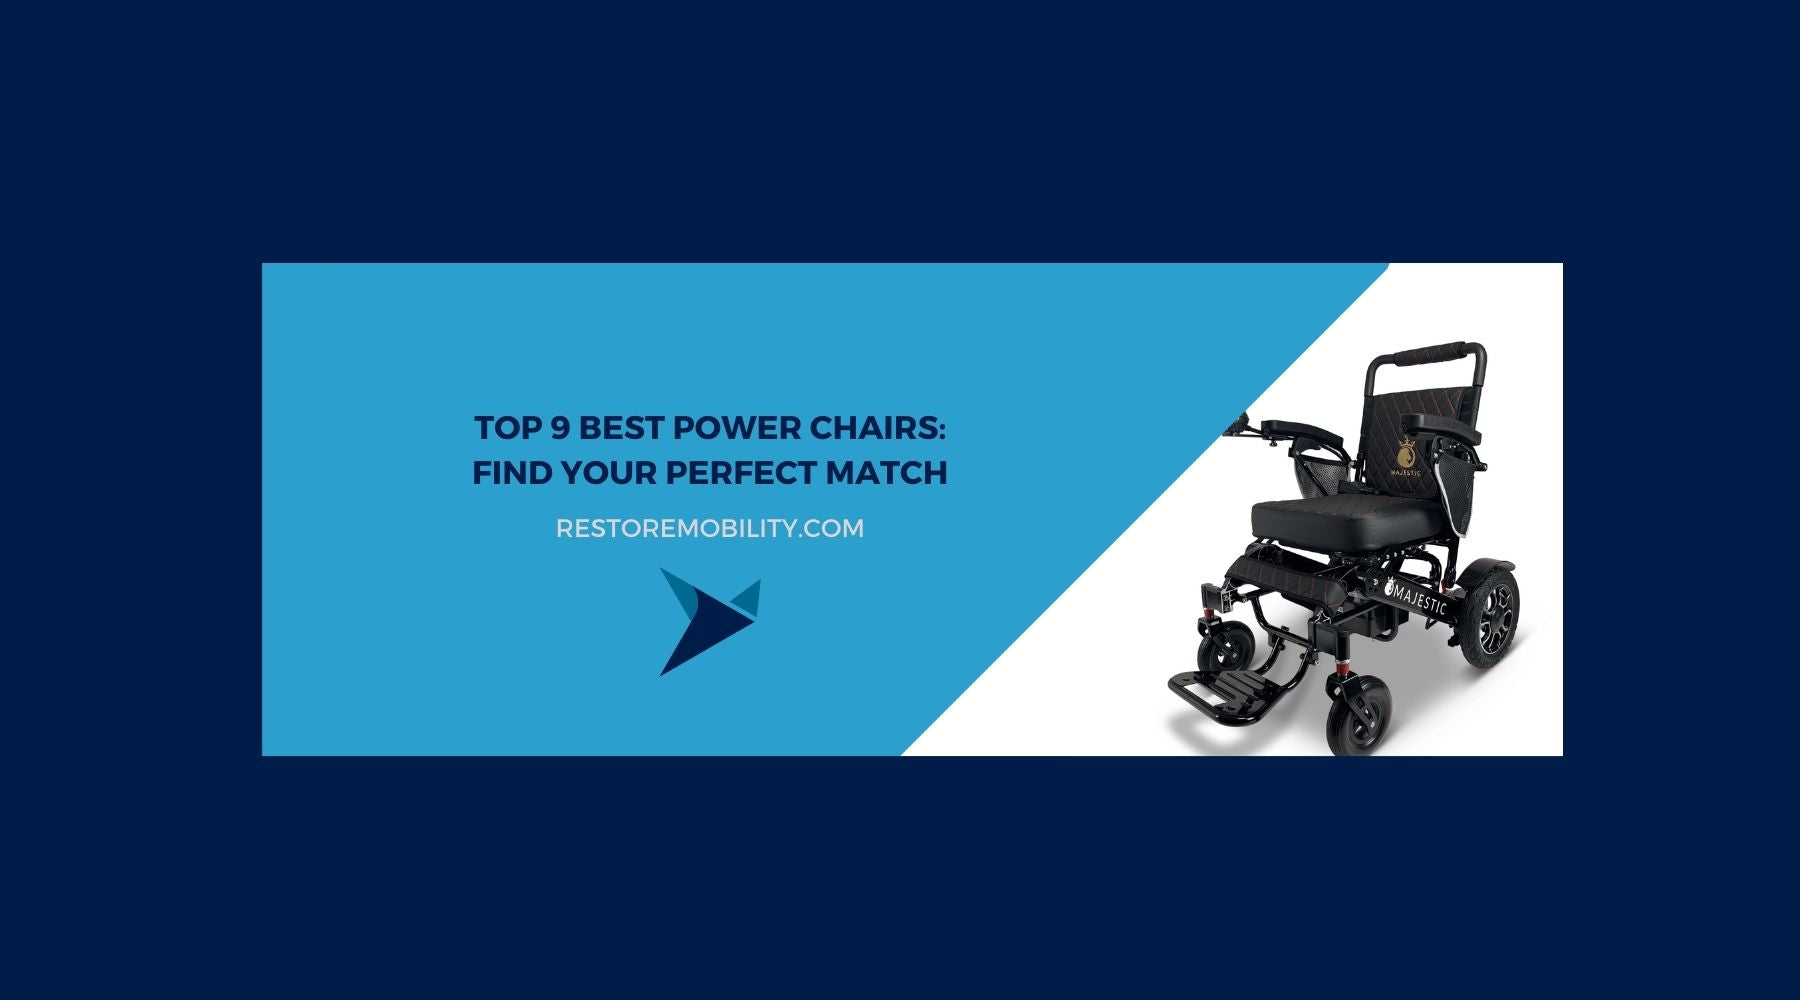 Top 9 Best Power Chairs: Find Your Perfect Match